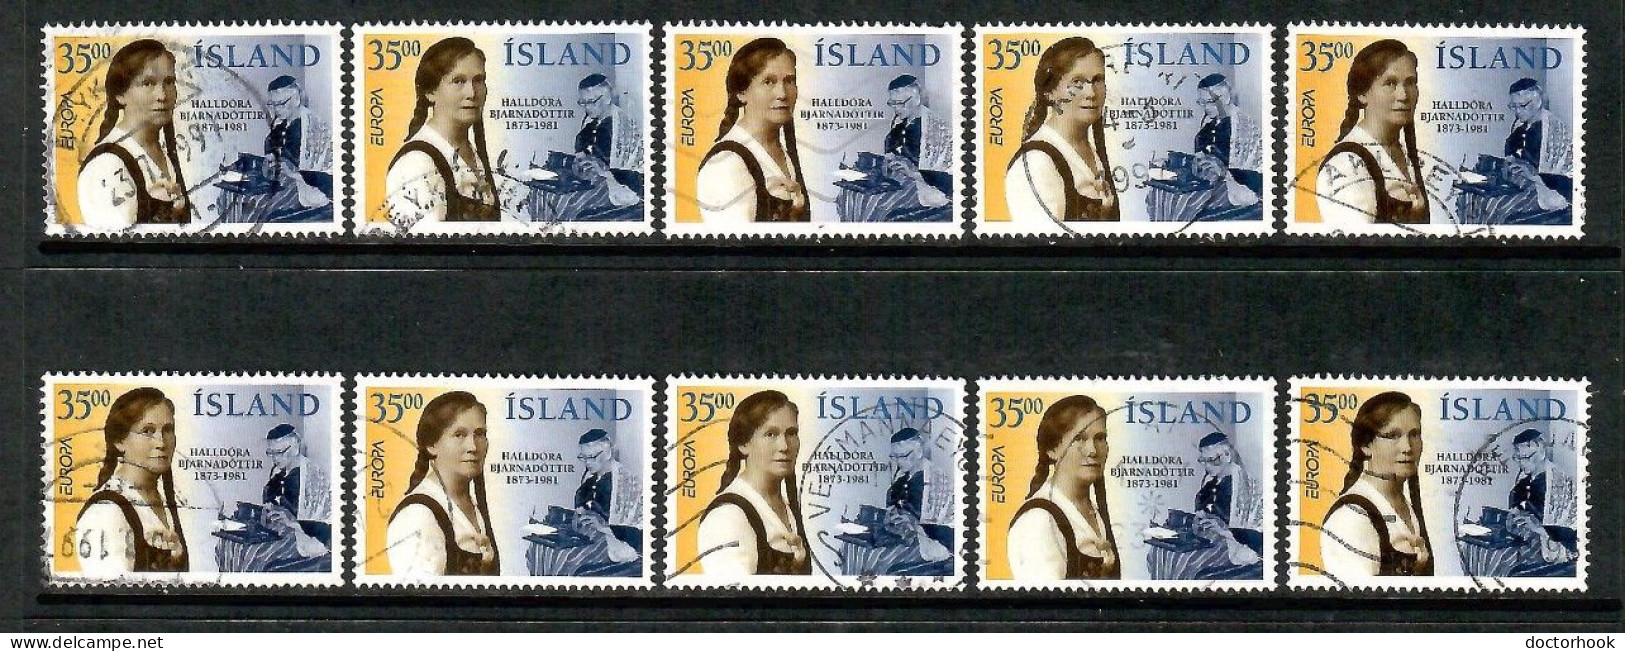 ICELAND   Scott # 818 USED WHOLESALE LOT OF 10 (CONDITION AS PER SCAN) (WH-628) - Collezioni & Lotti